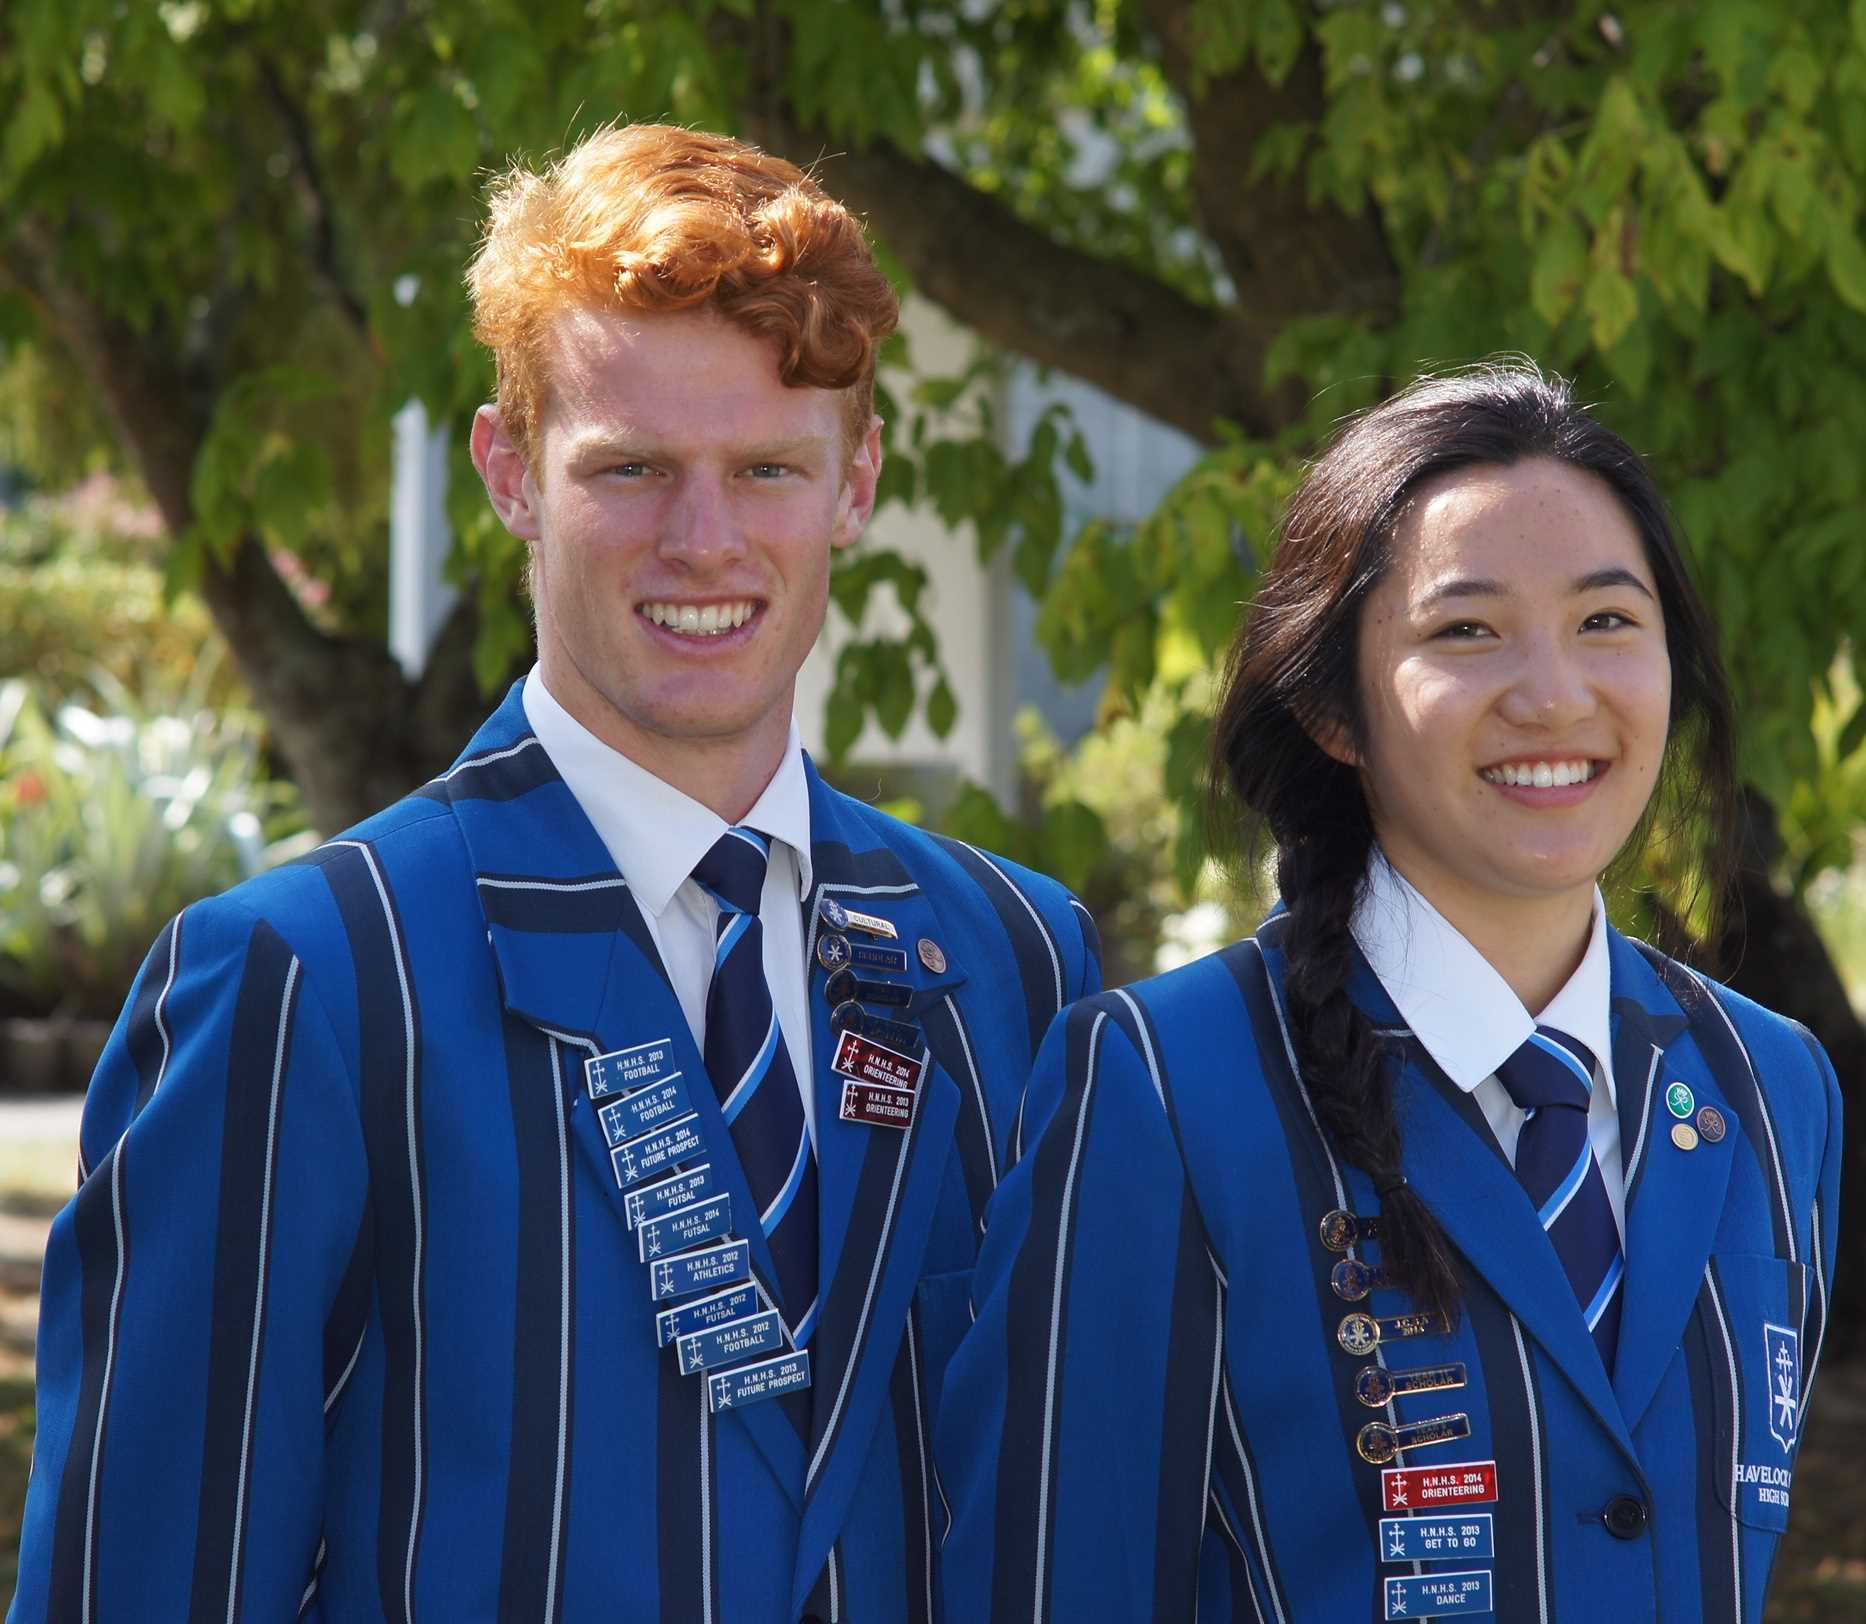 Head Students Announced with regard to Wo Mitchell School Calendar